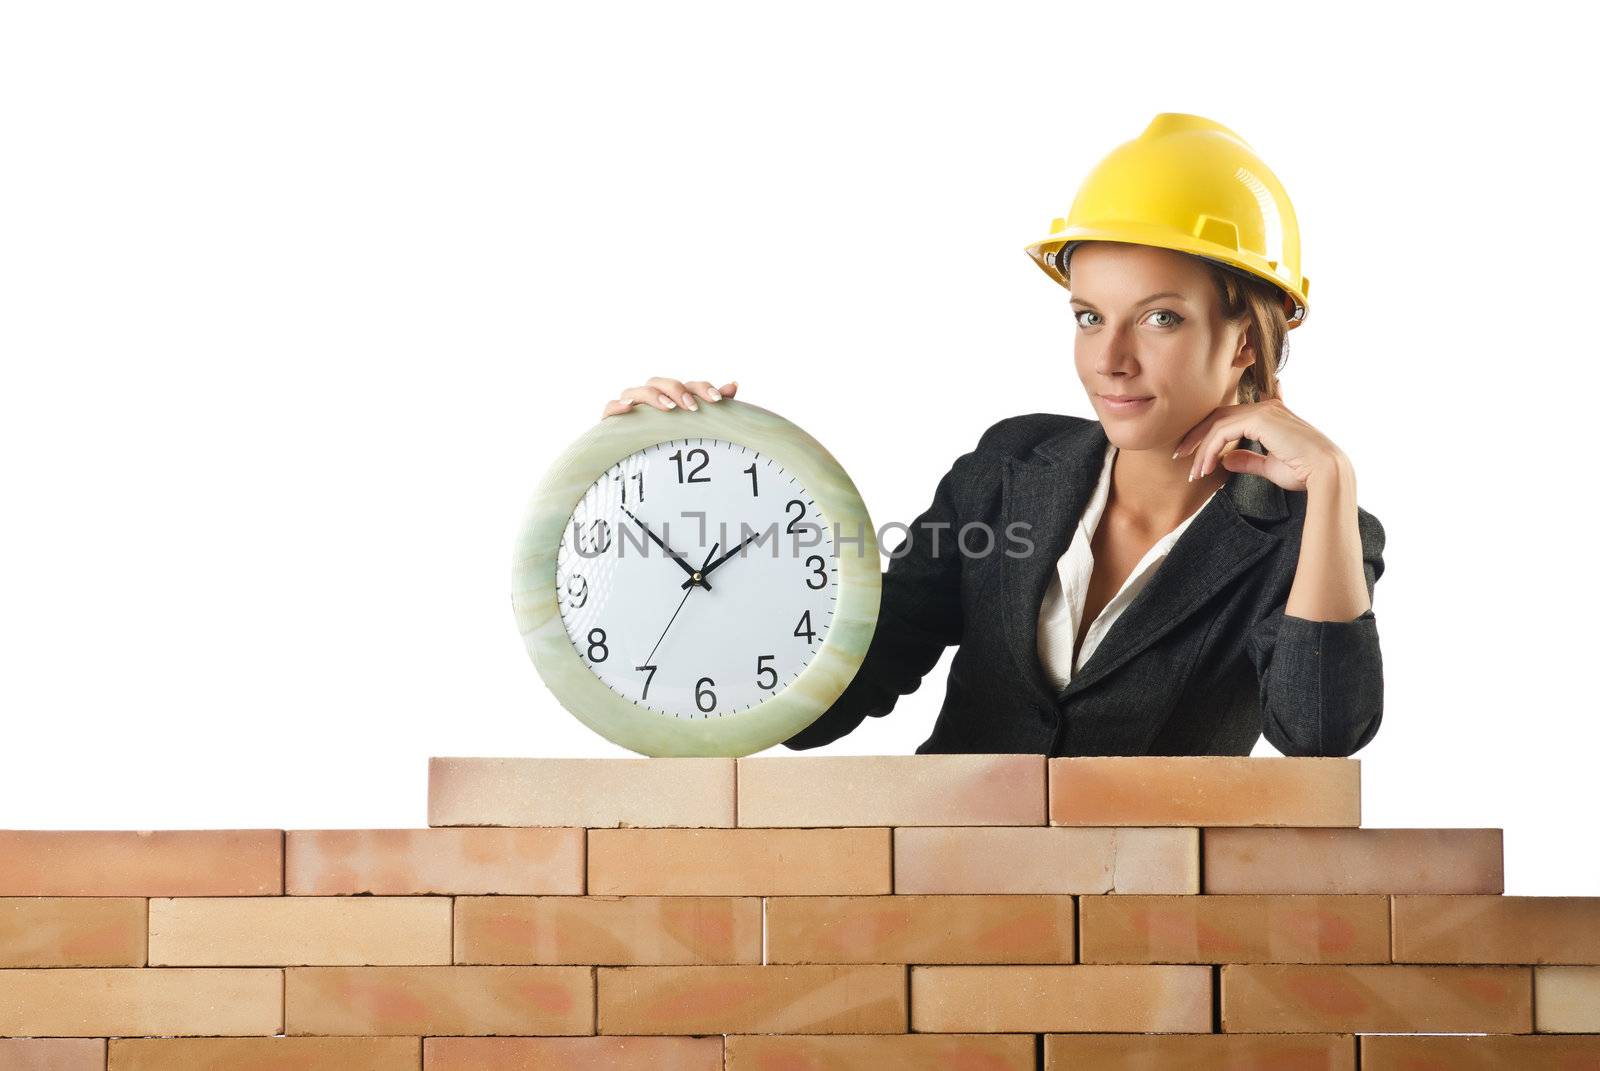 Female builder and clock on white